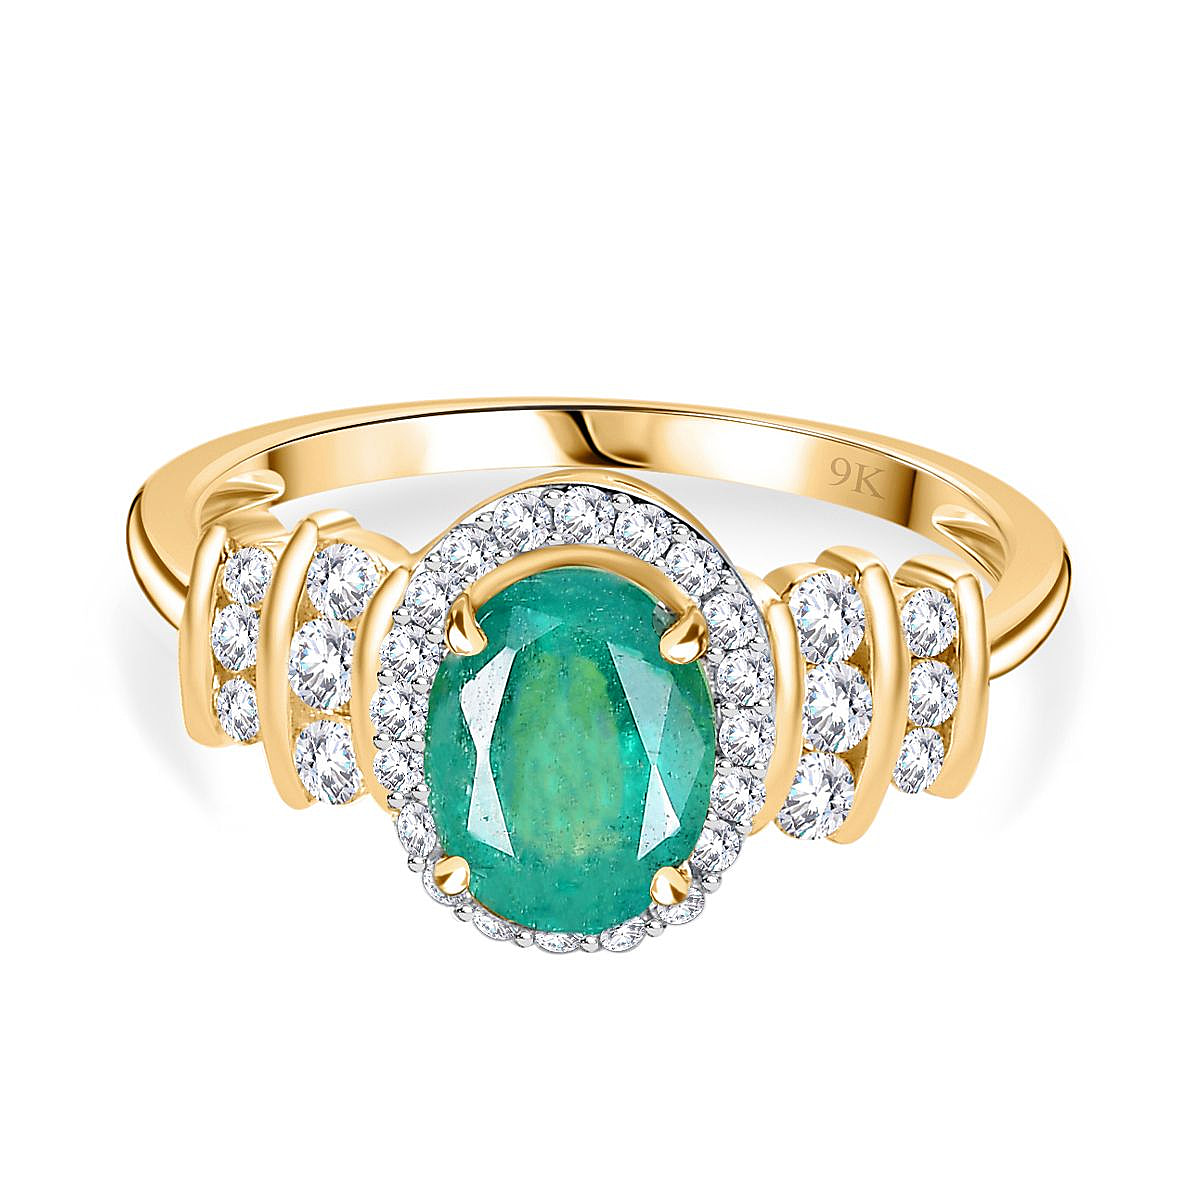 Doorbuster - AAA Gemfields Zambian Emerald 9K Yellow Gold with Moissanite 1.75 Cts